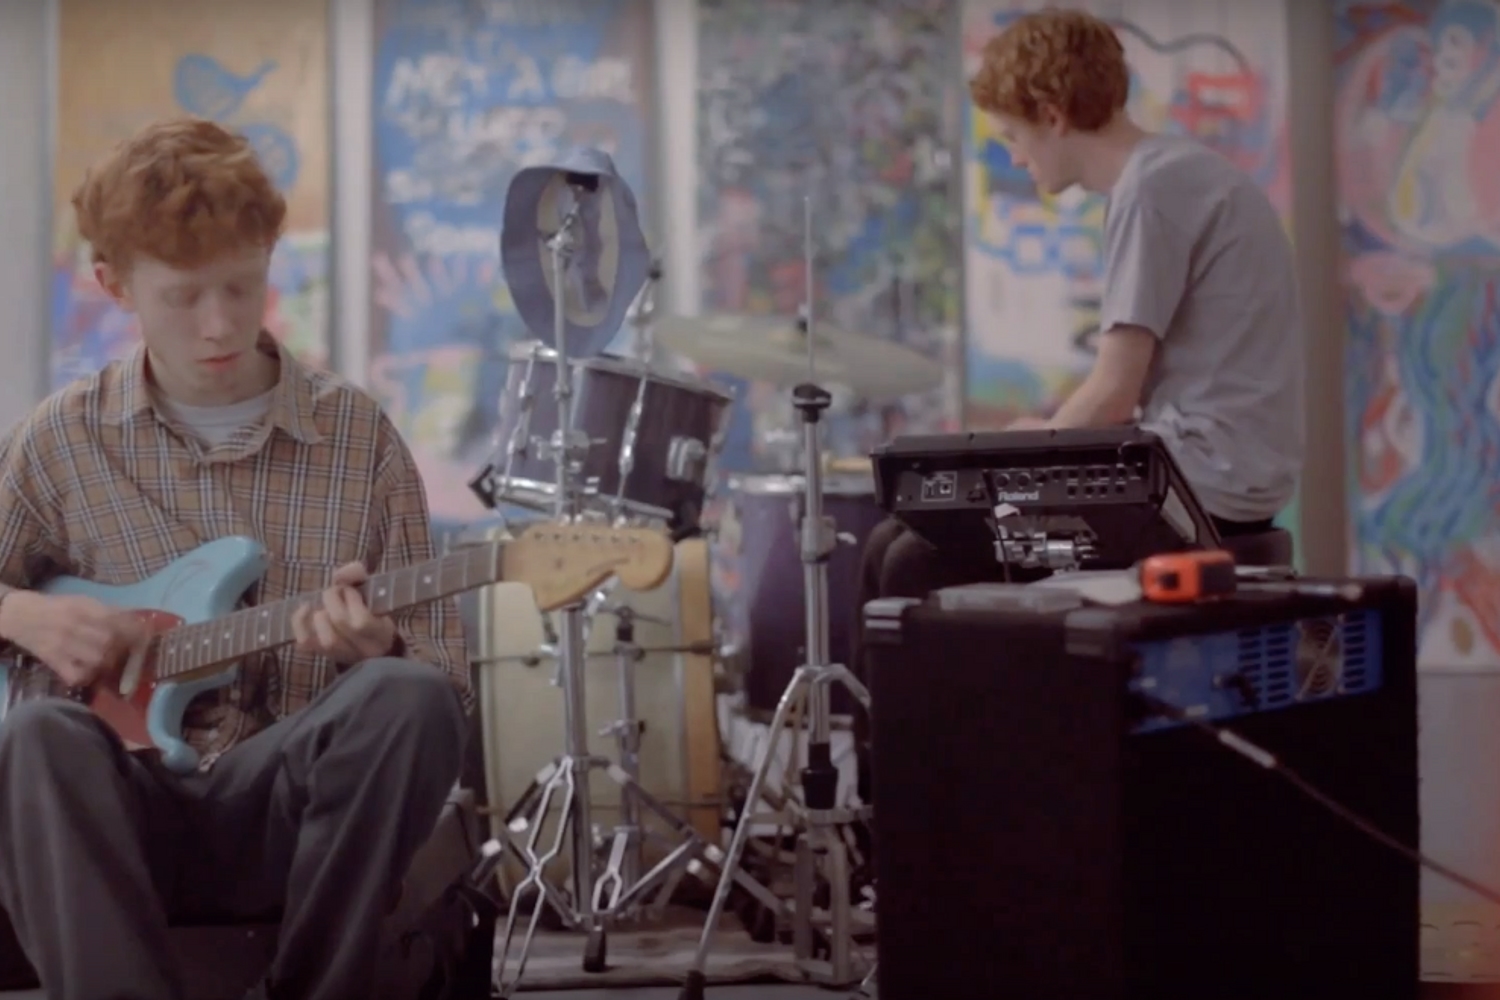 Archy Marshall (a.k.a. King Krule) readies ‘A New Place 2 Drown’ with Radio 1 interview